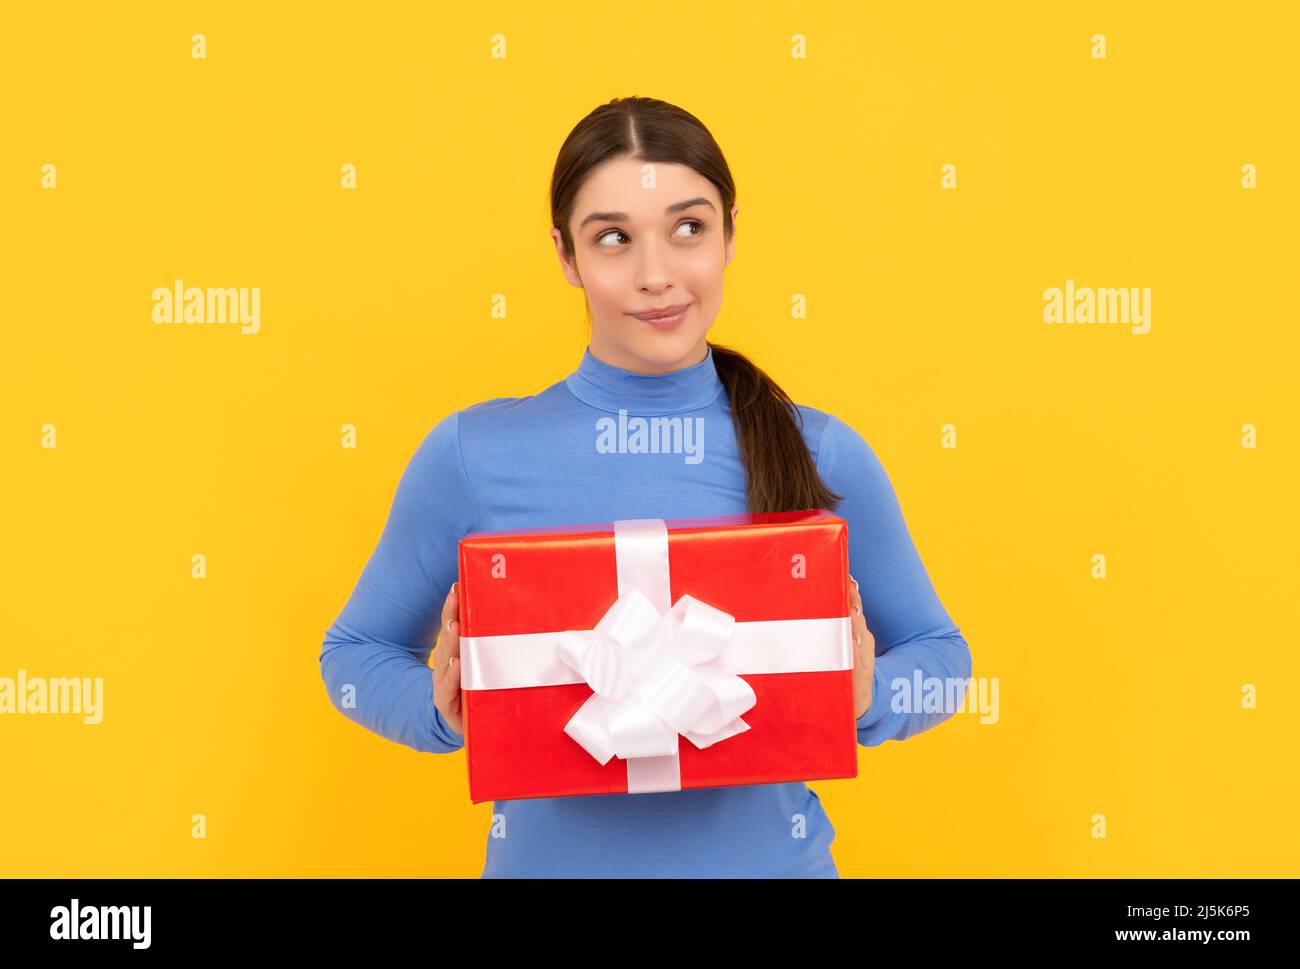 black friday discount. seasonal sales. dreamy girl with box on yellow background. boxing day. Stock Photo